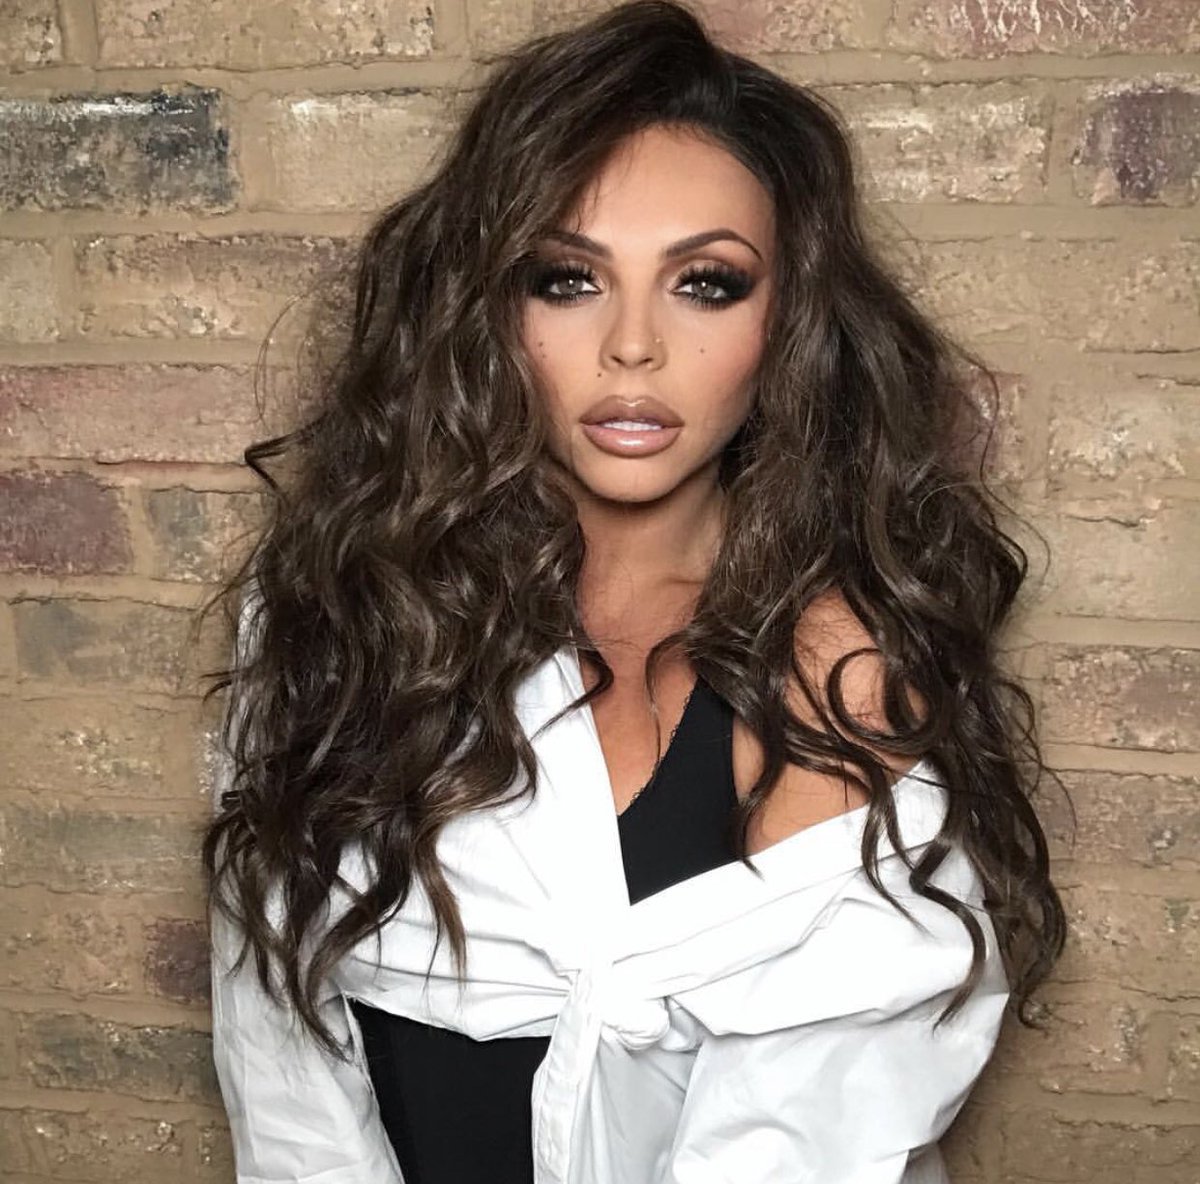 Exciting day today!Just you wait mixers 🙊
xjesyx